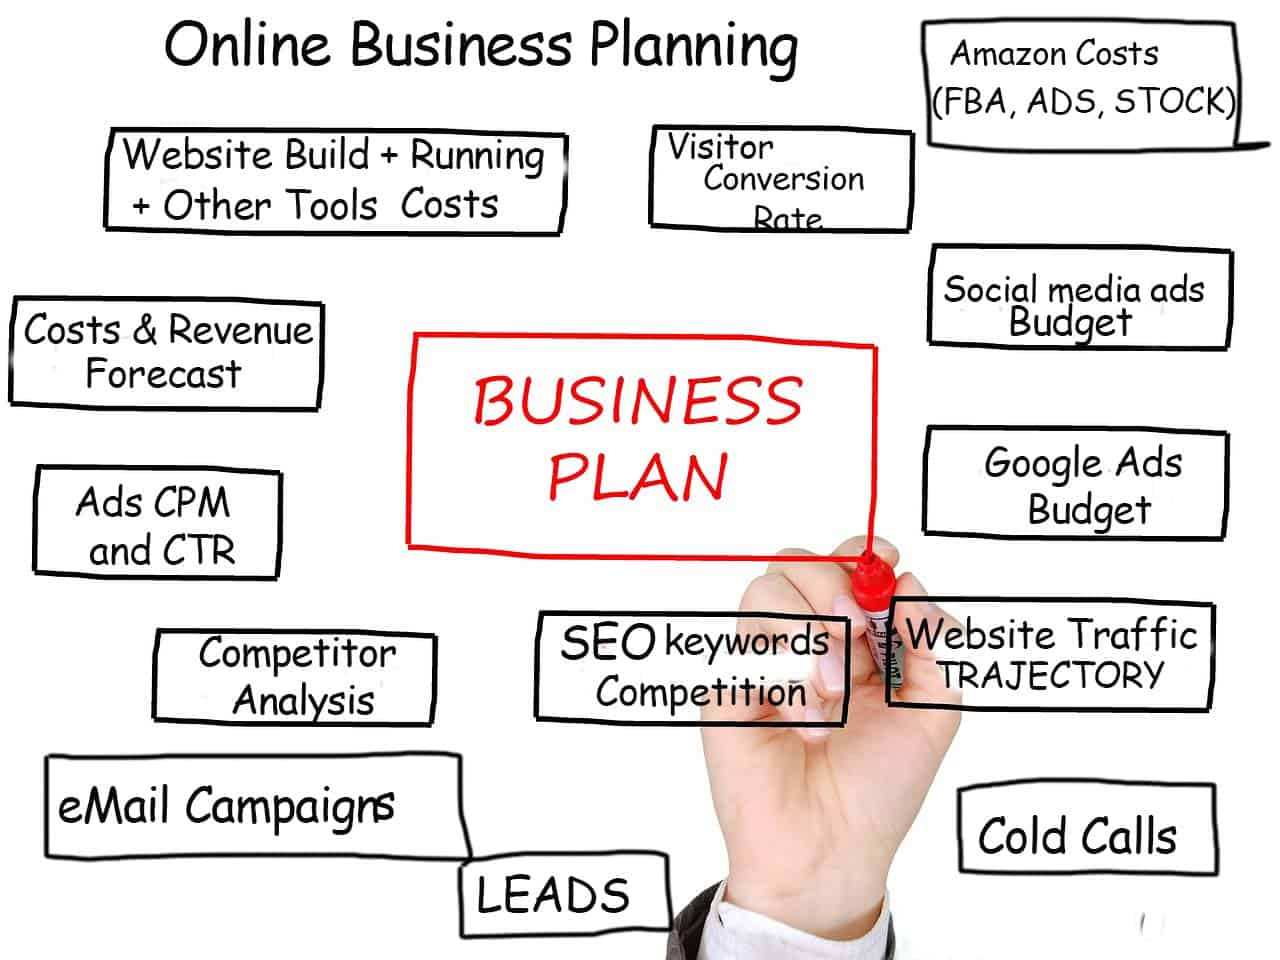 Do you need a business plan for an online business